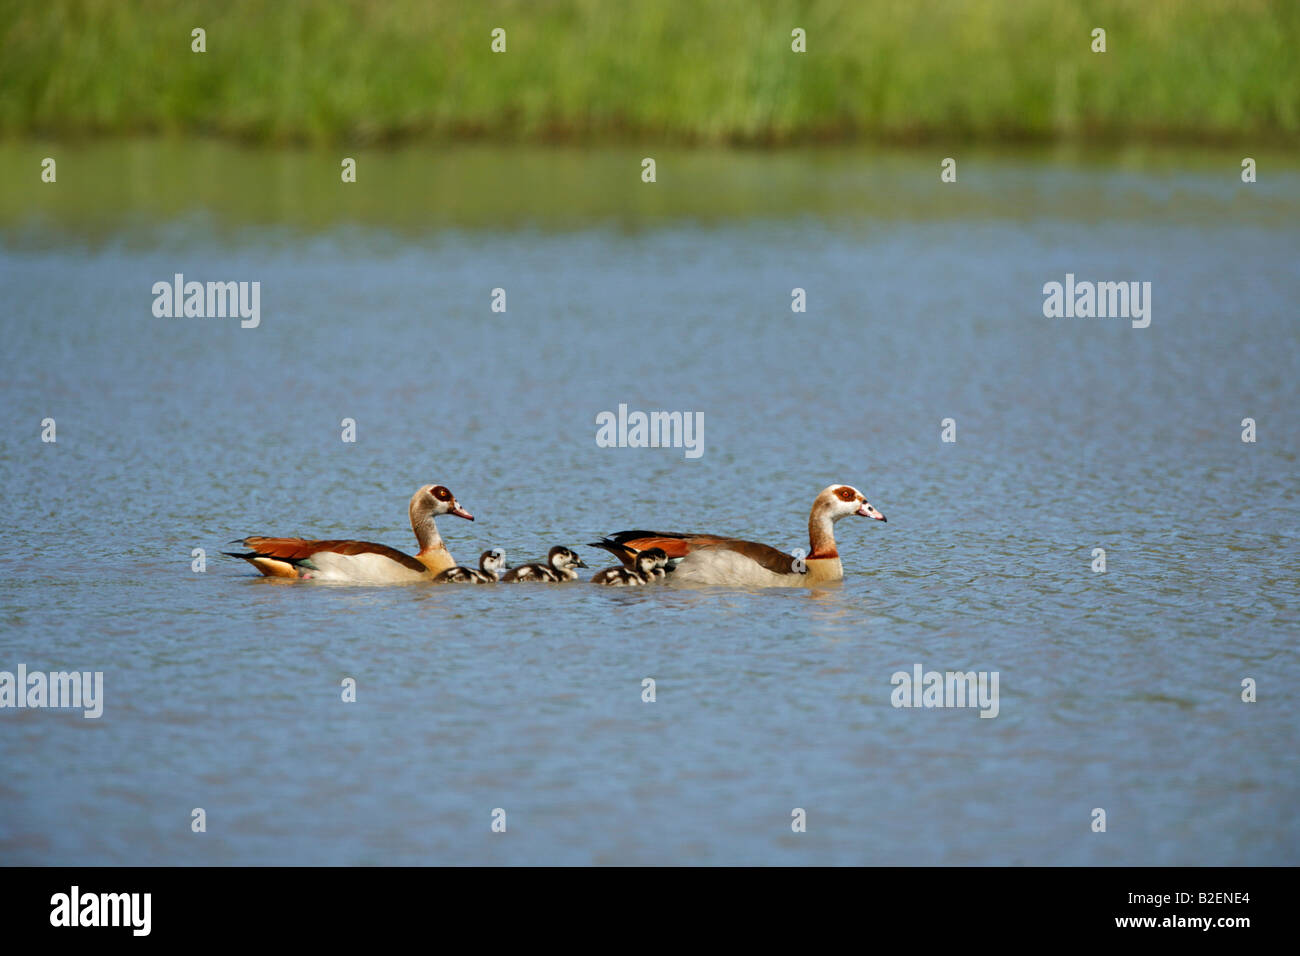 Egyptian goose male and female shepherd their flock of goslings between them while swimming on a lake Stock Photo